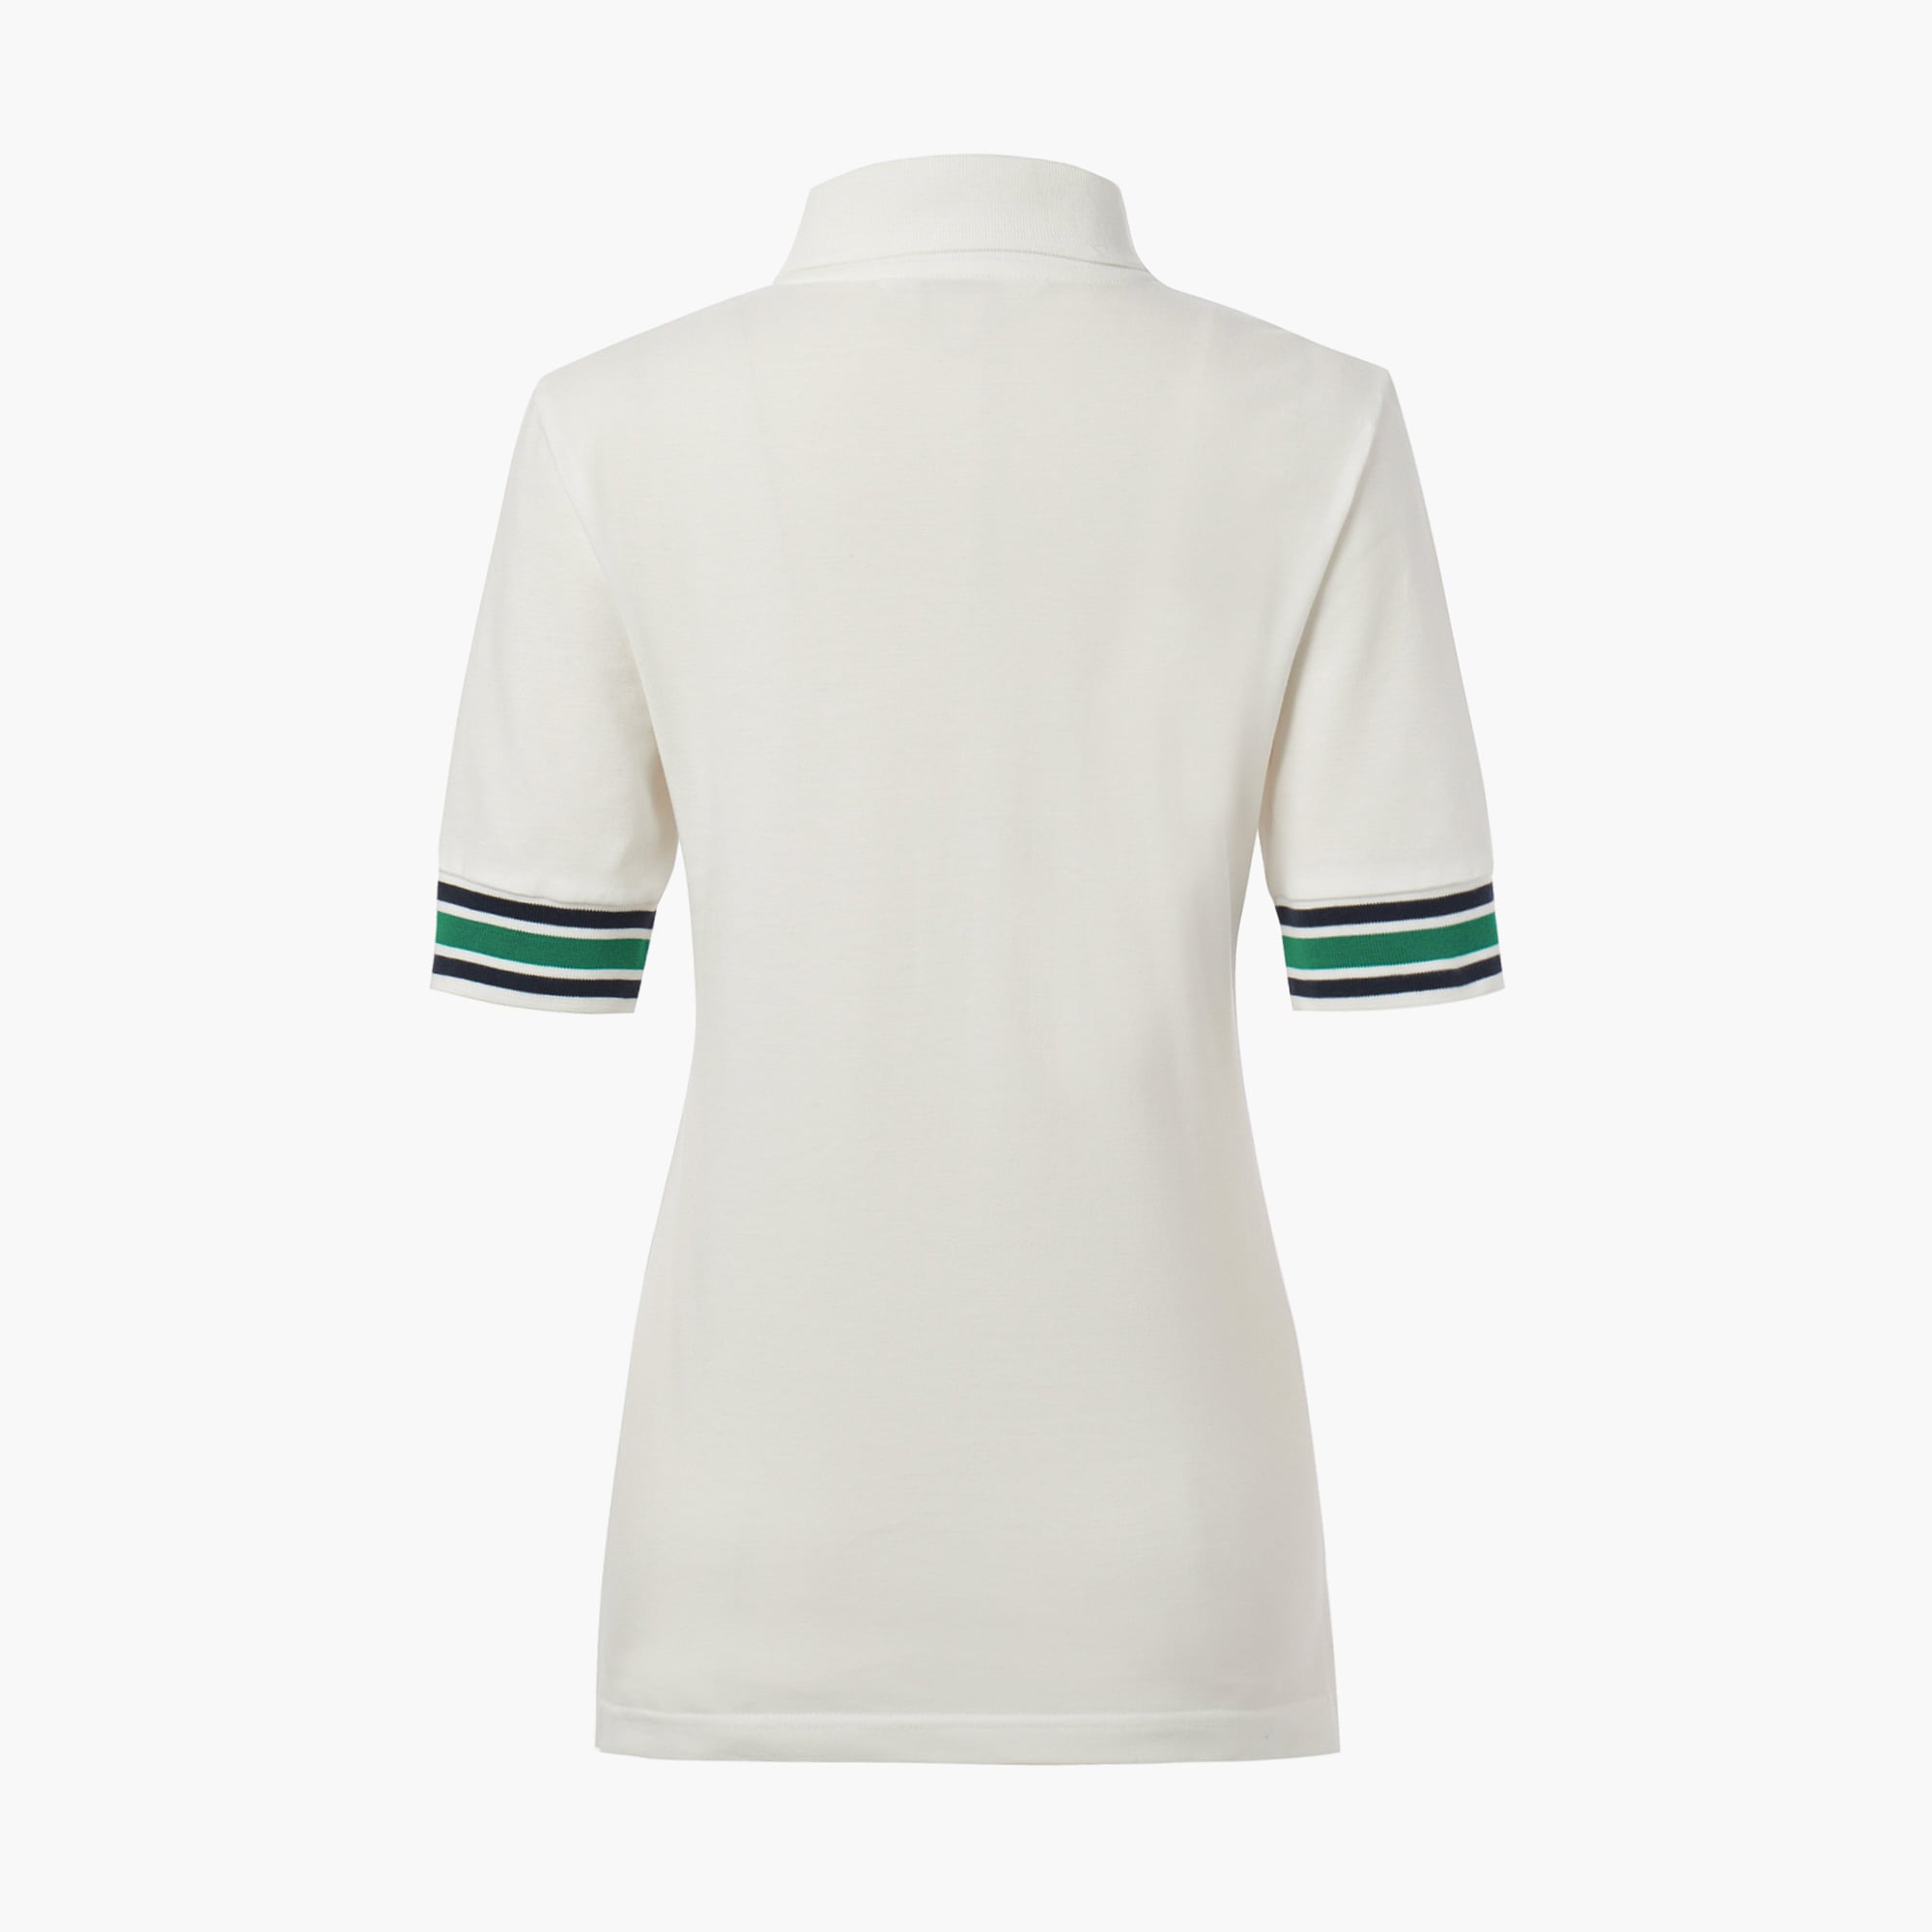 PERFECT PLAYER POLO SHIRT - LINGER GALLERY